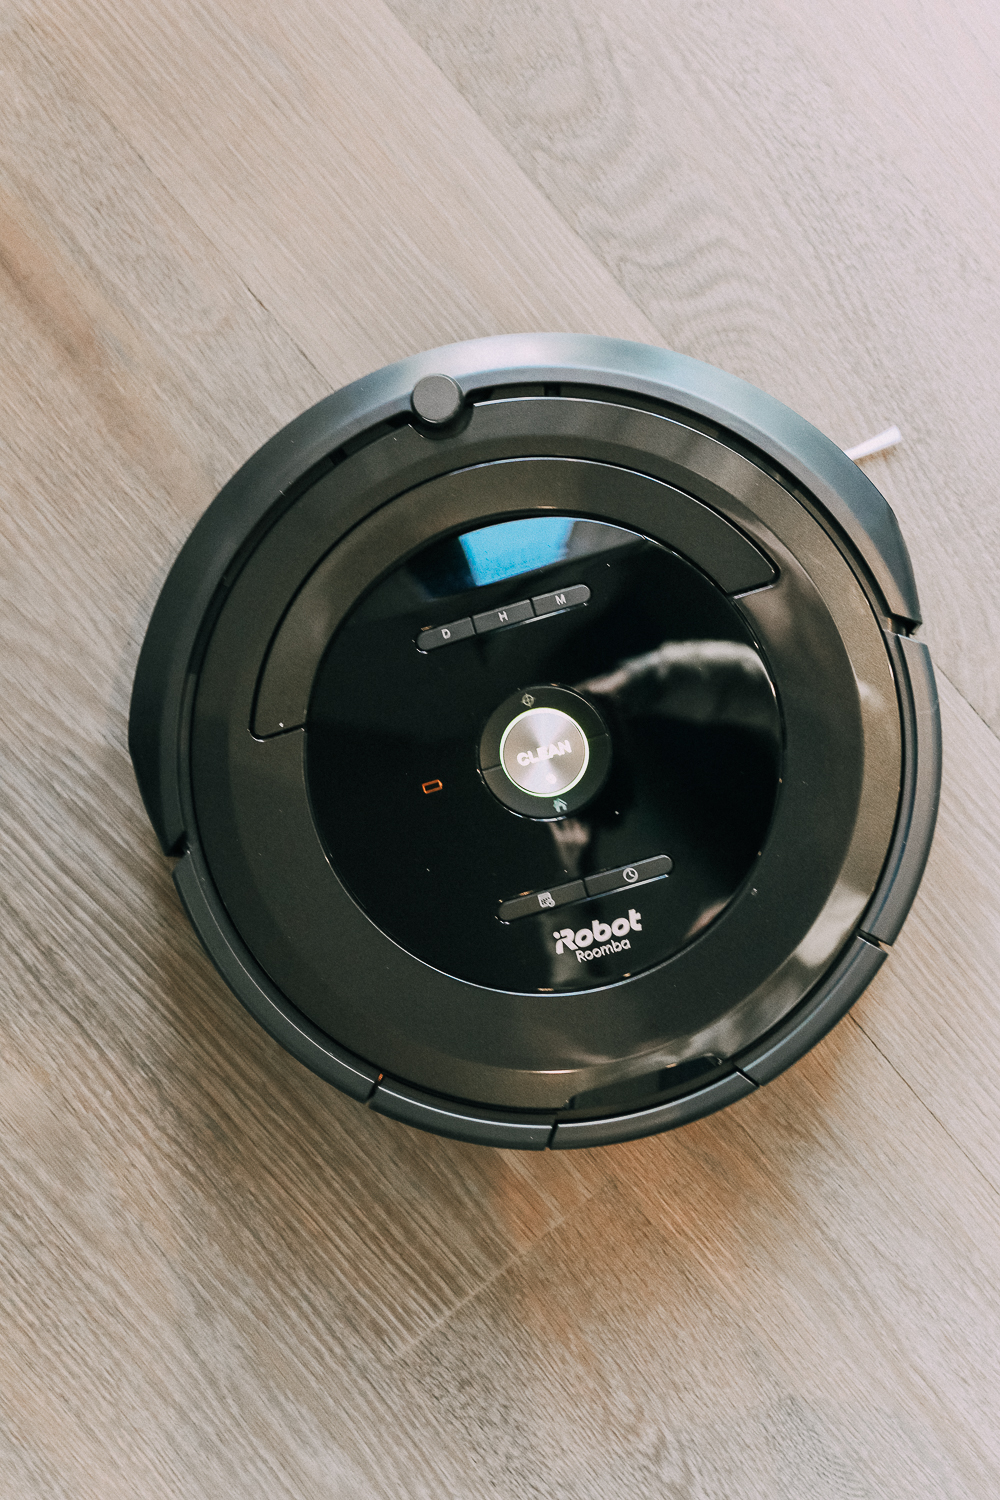 Best Selling Gifts QVC featuring the Roomba vacuum cleaner